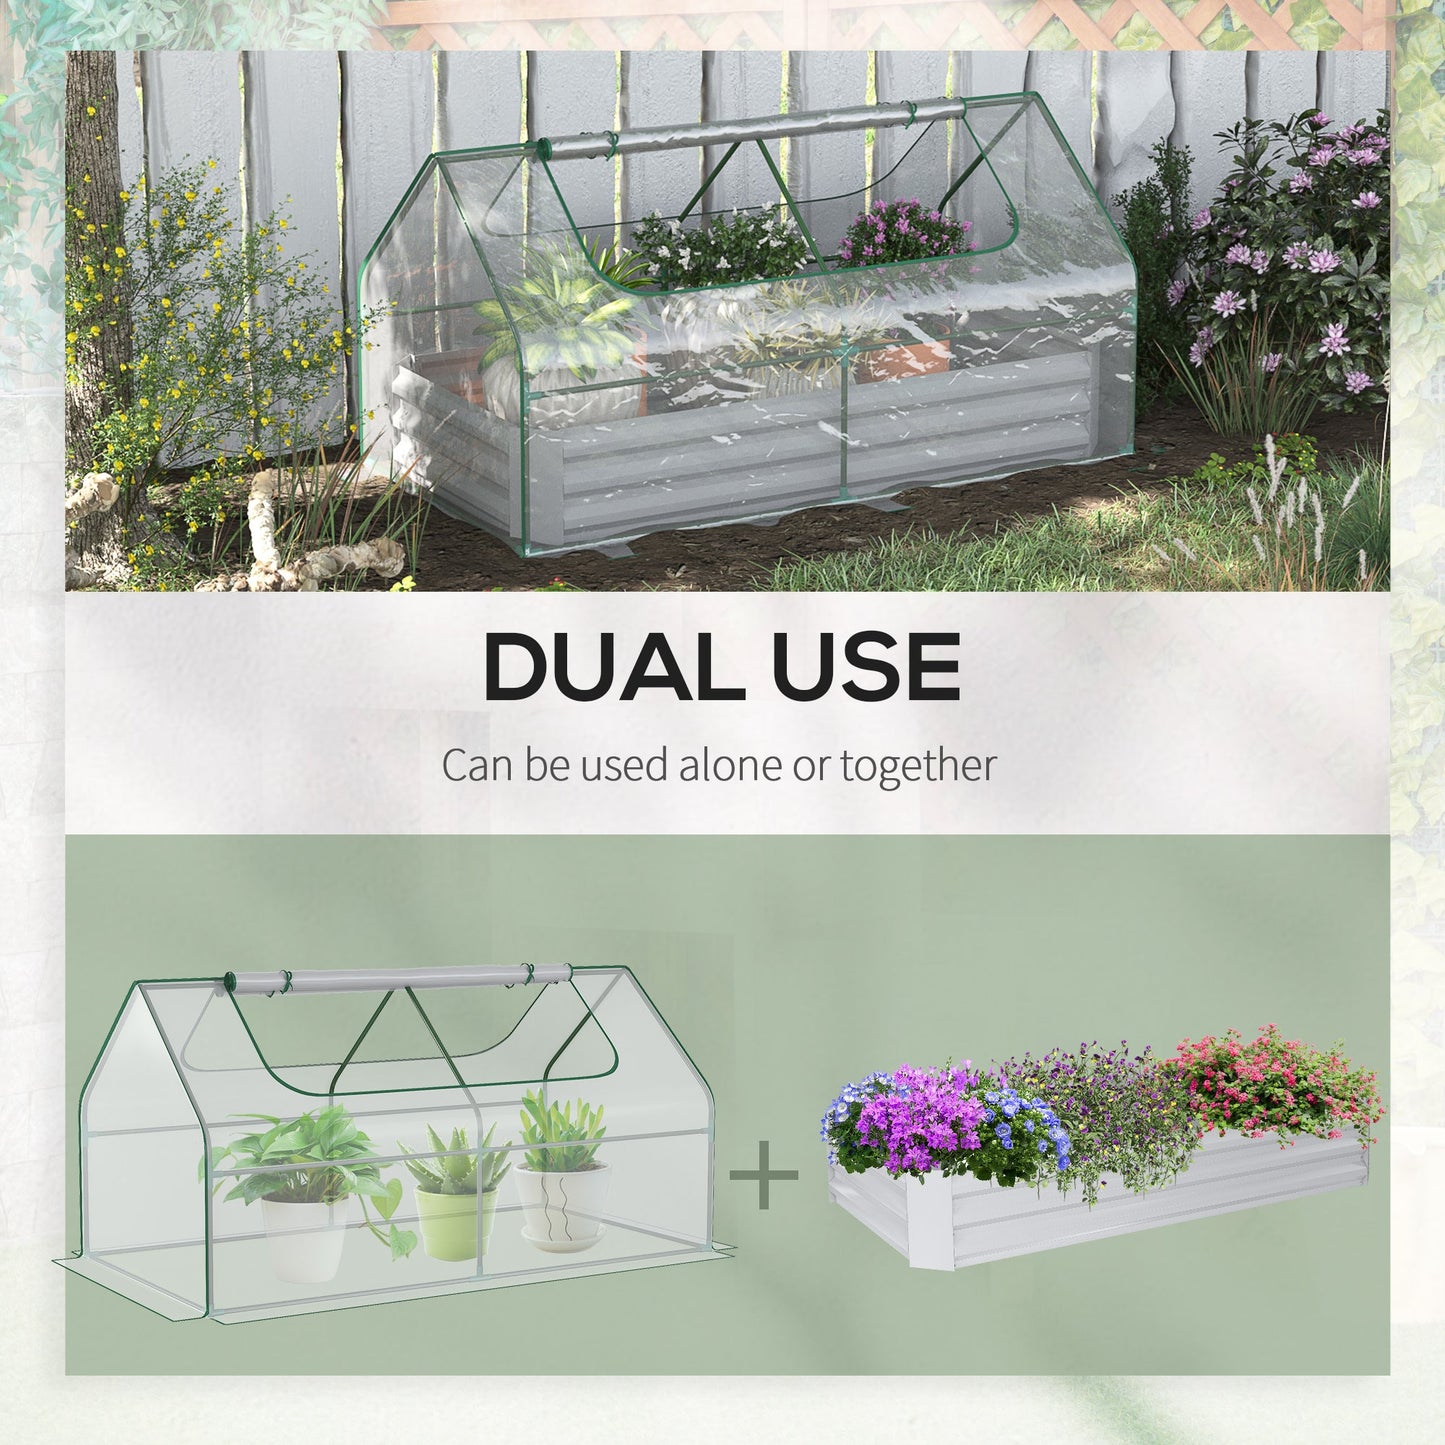 Outdoor and Garden-Garden Bed with Mini Greenhouse, Outdoor Raised Bed Box with Plastic Cover, Roll Up Window, for Flowers, Herbs, Light Gray - Outdoor Style Company